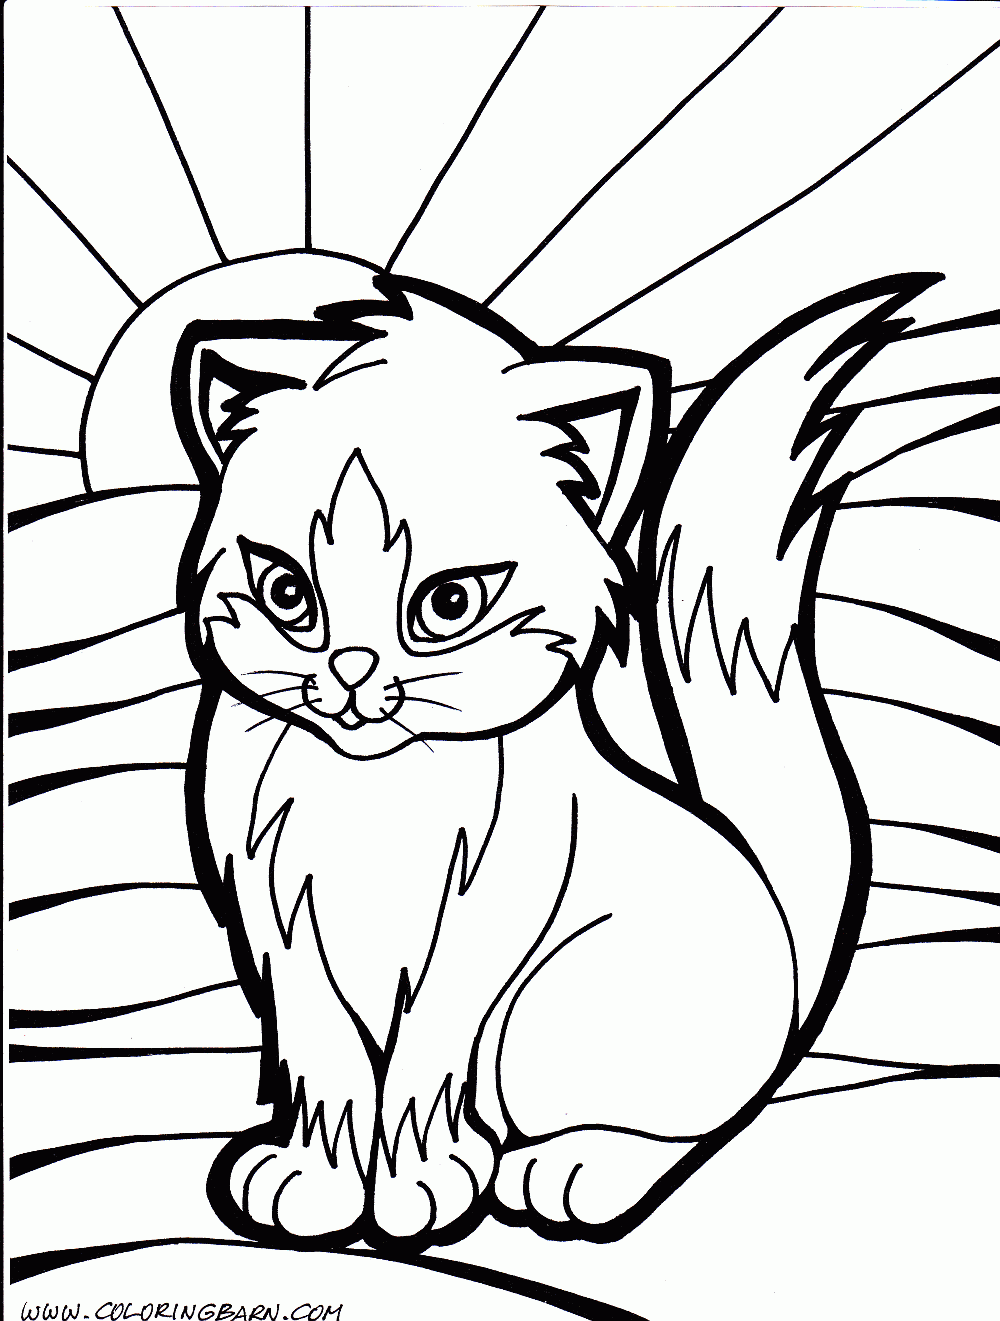 Cute Cat Coloring Pages To Download And Print For Free   Coloring Home